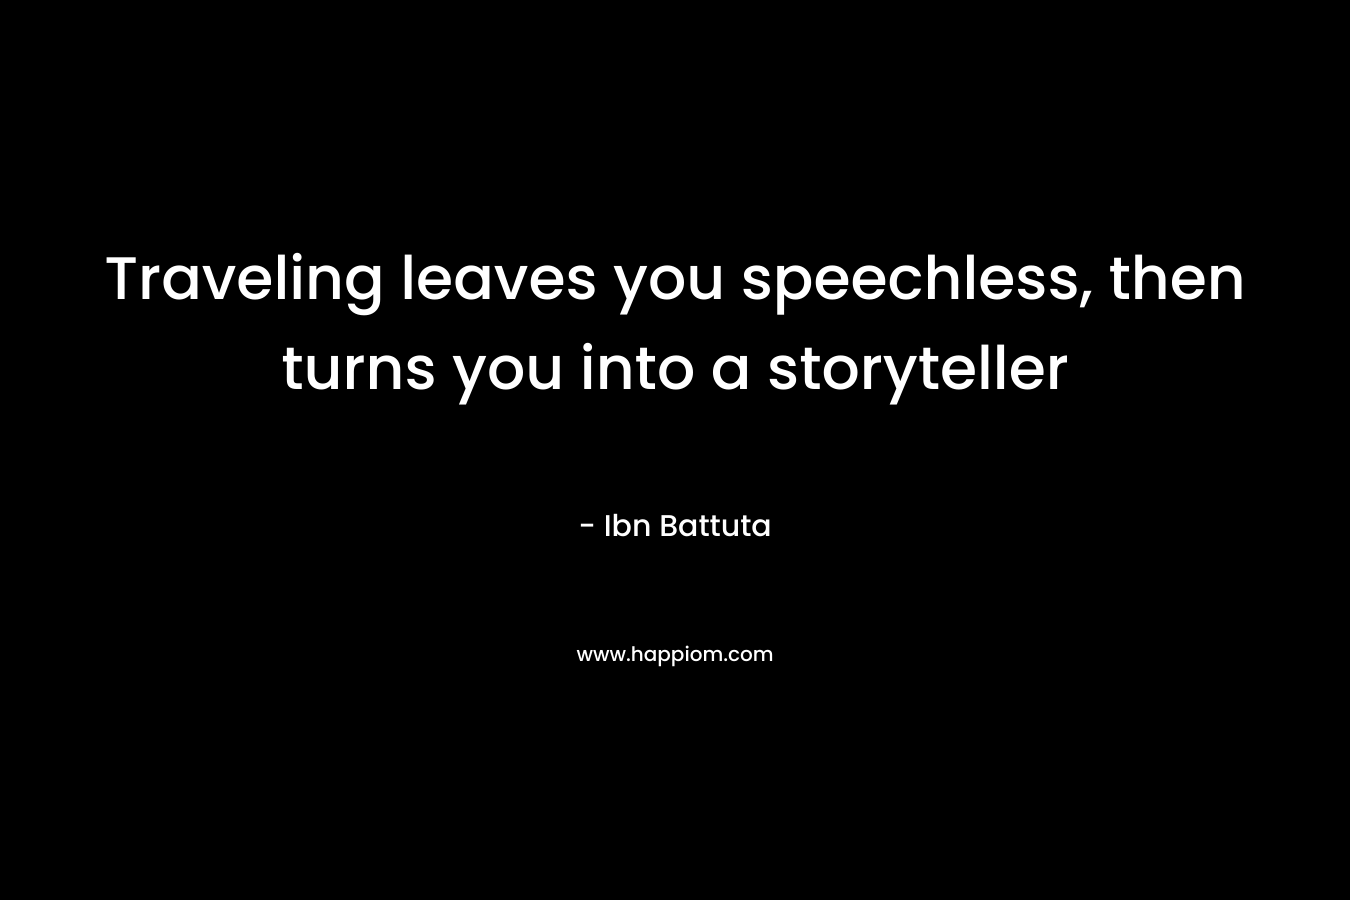 Traveling leaves you speechless, then turns you into a storyteller